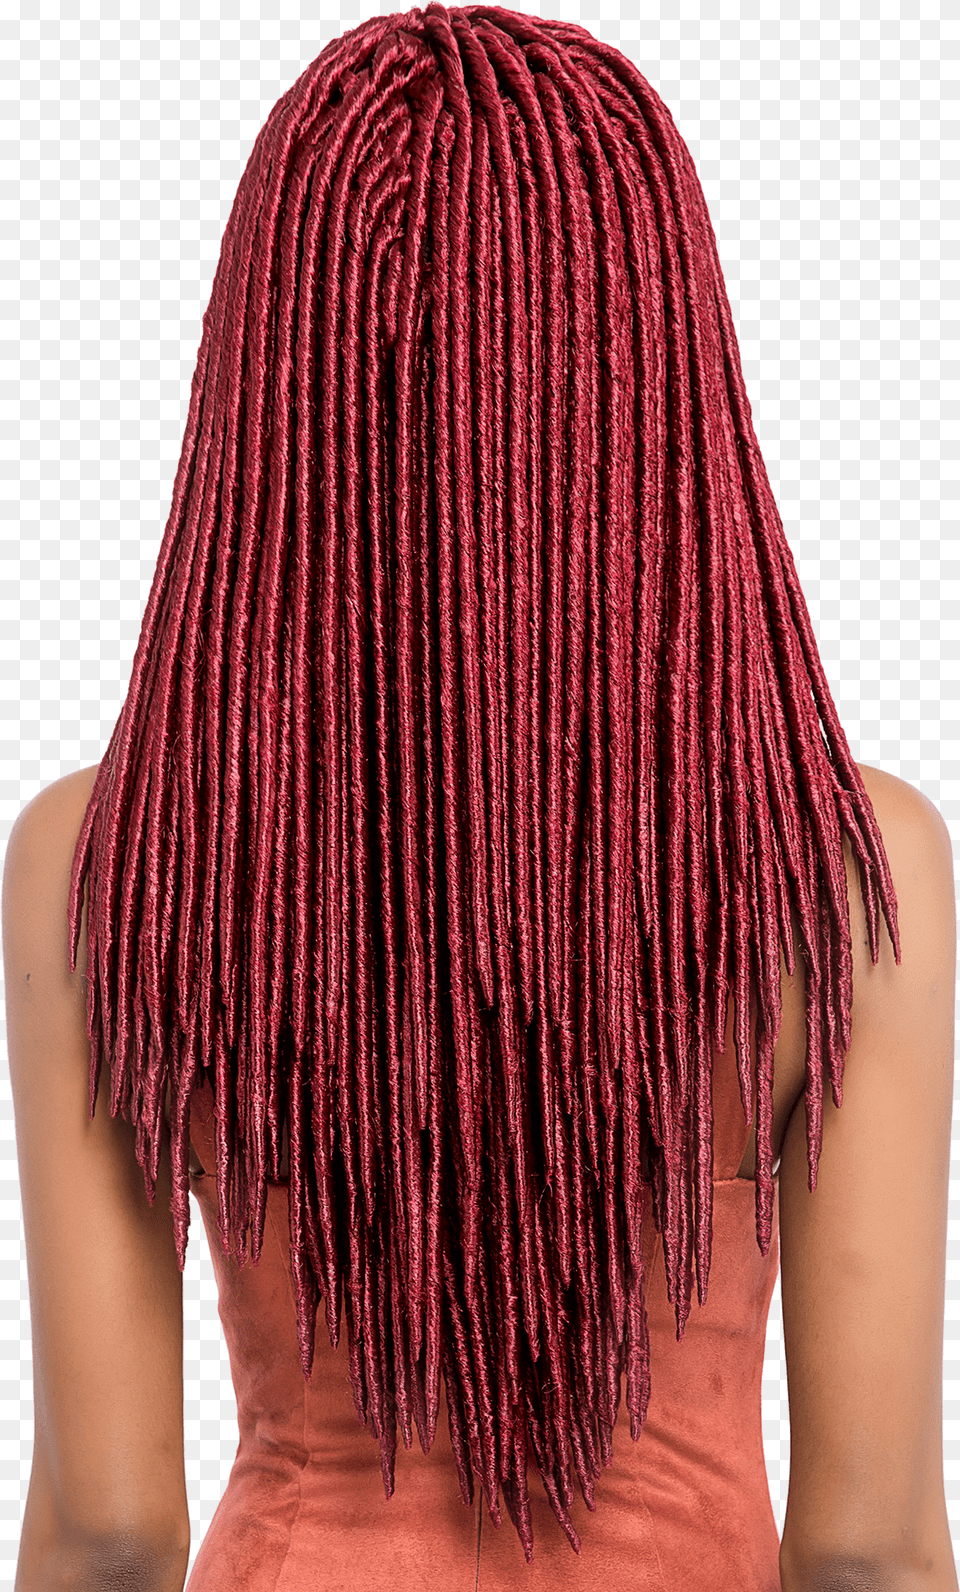 Lace Wig Free Png Download